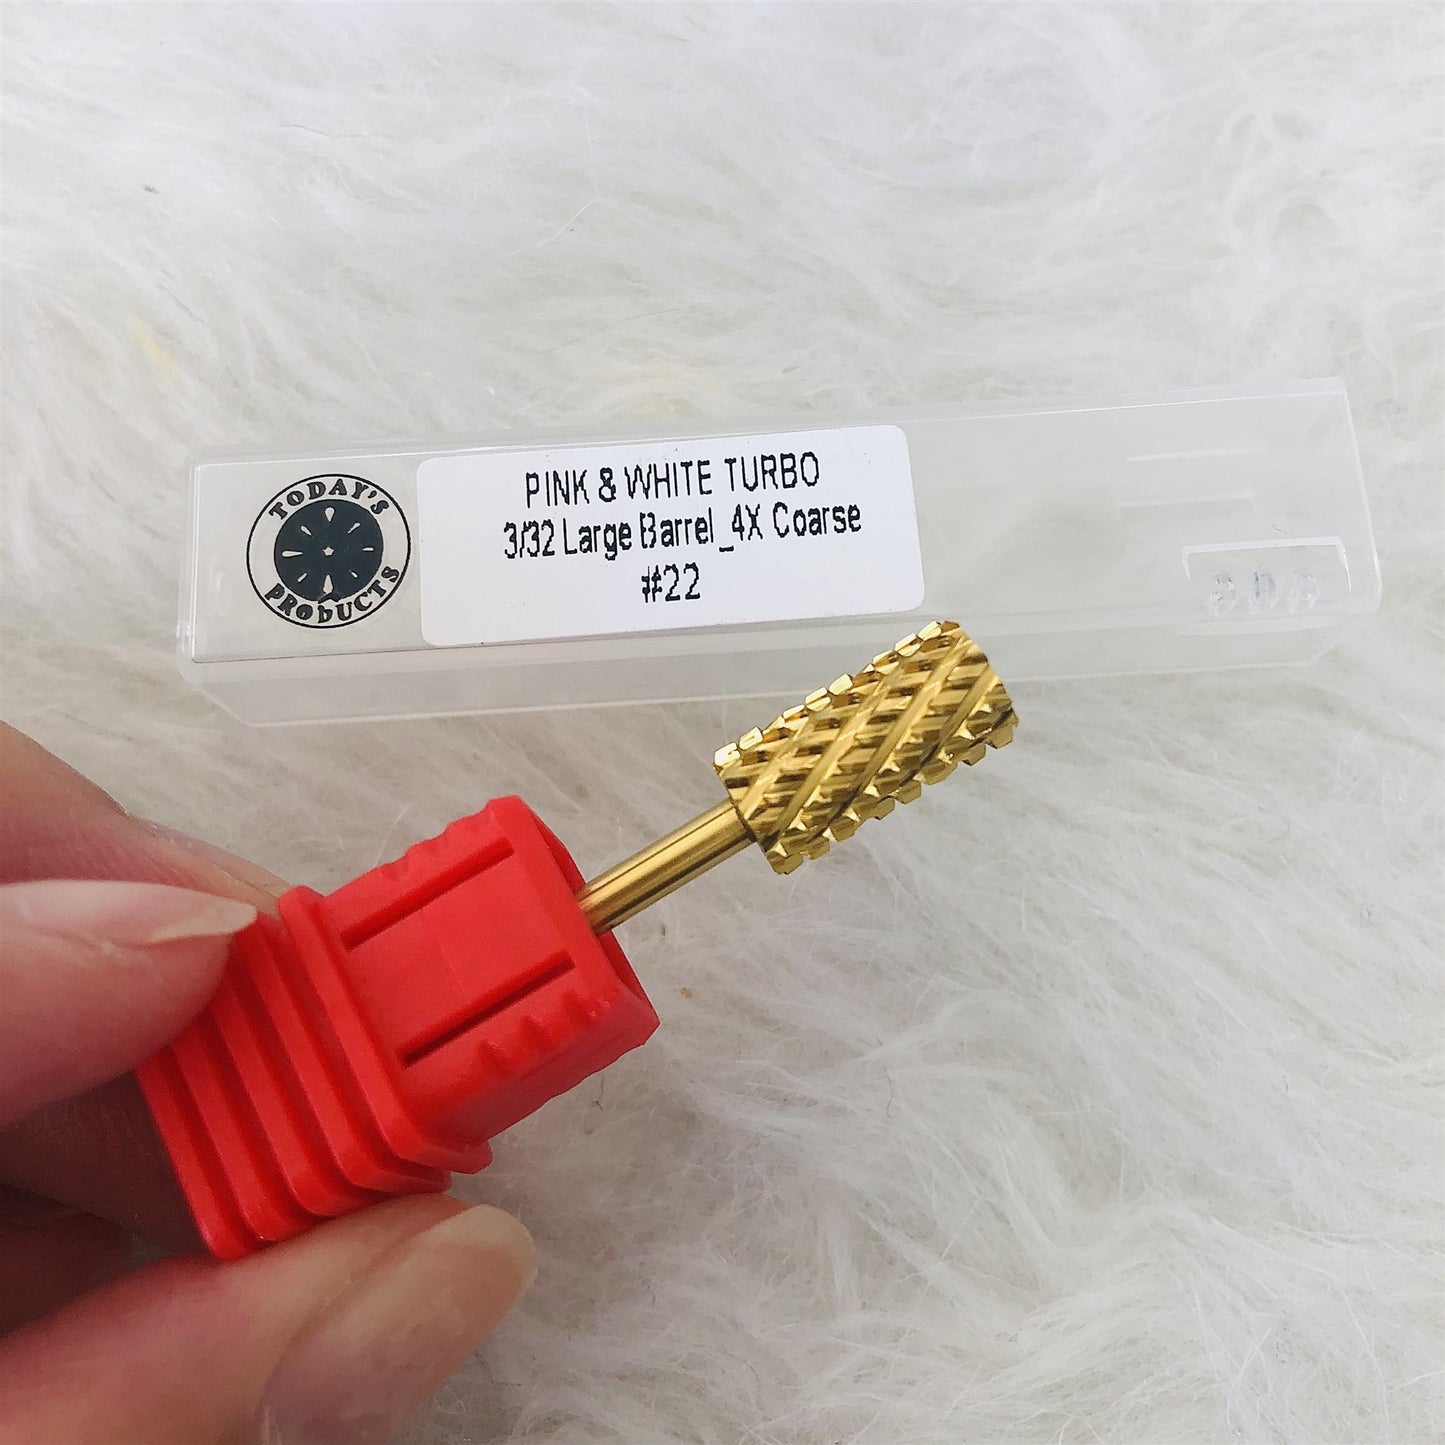 Pink & White Turbo Large Barrel Nail Drill Bit - 4X Coarse This type of drill bits are designed to rapidly file down thick or long pink & white for back-fill process.